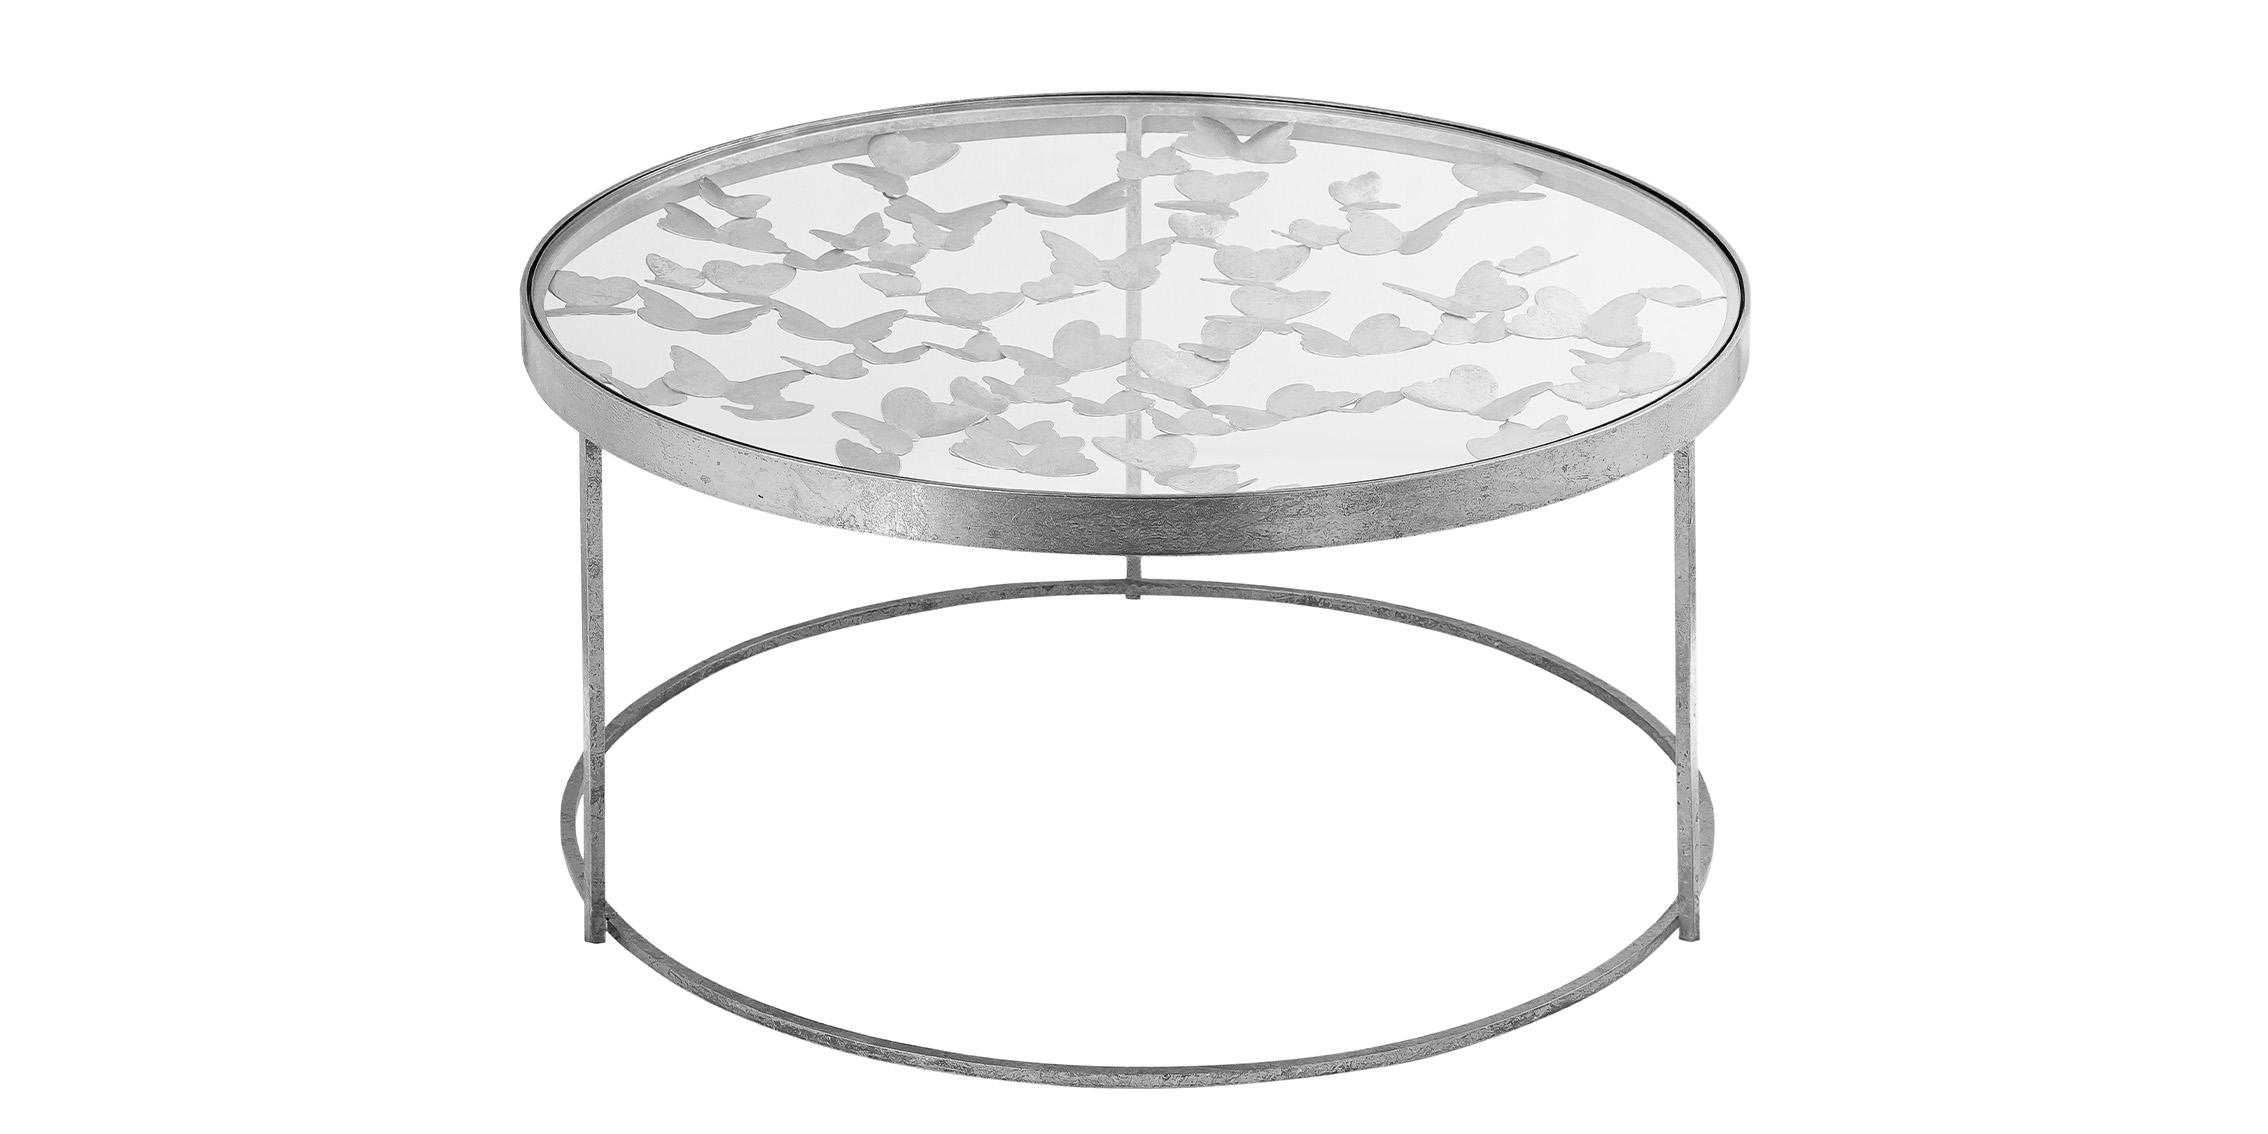 Contemporary, Modern Coffee Table BUTTERFLY 471-C 471-C in Silver 